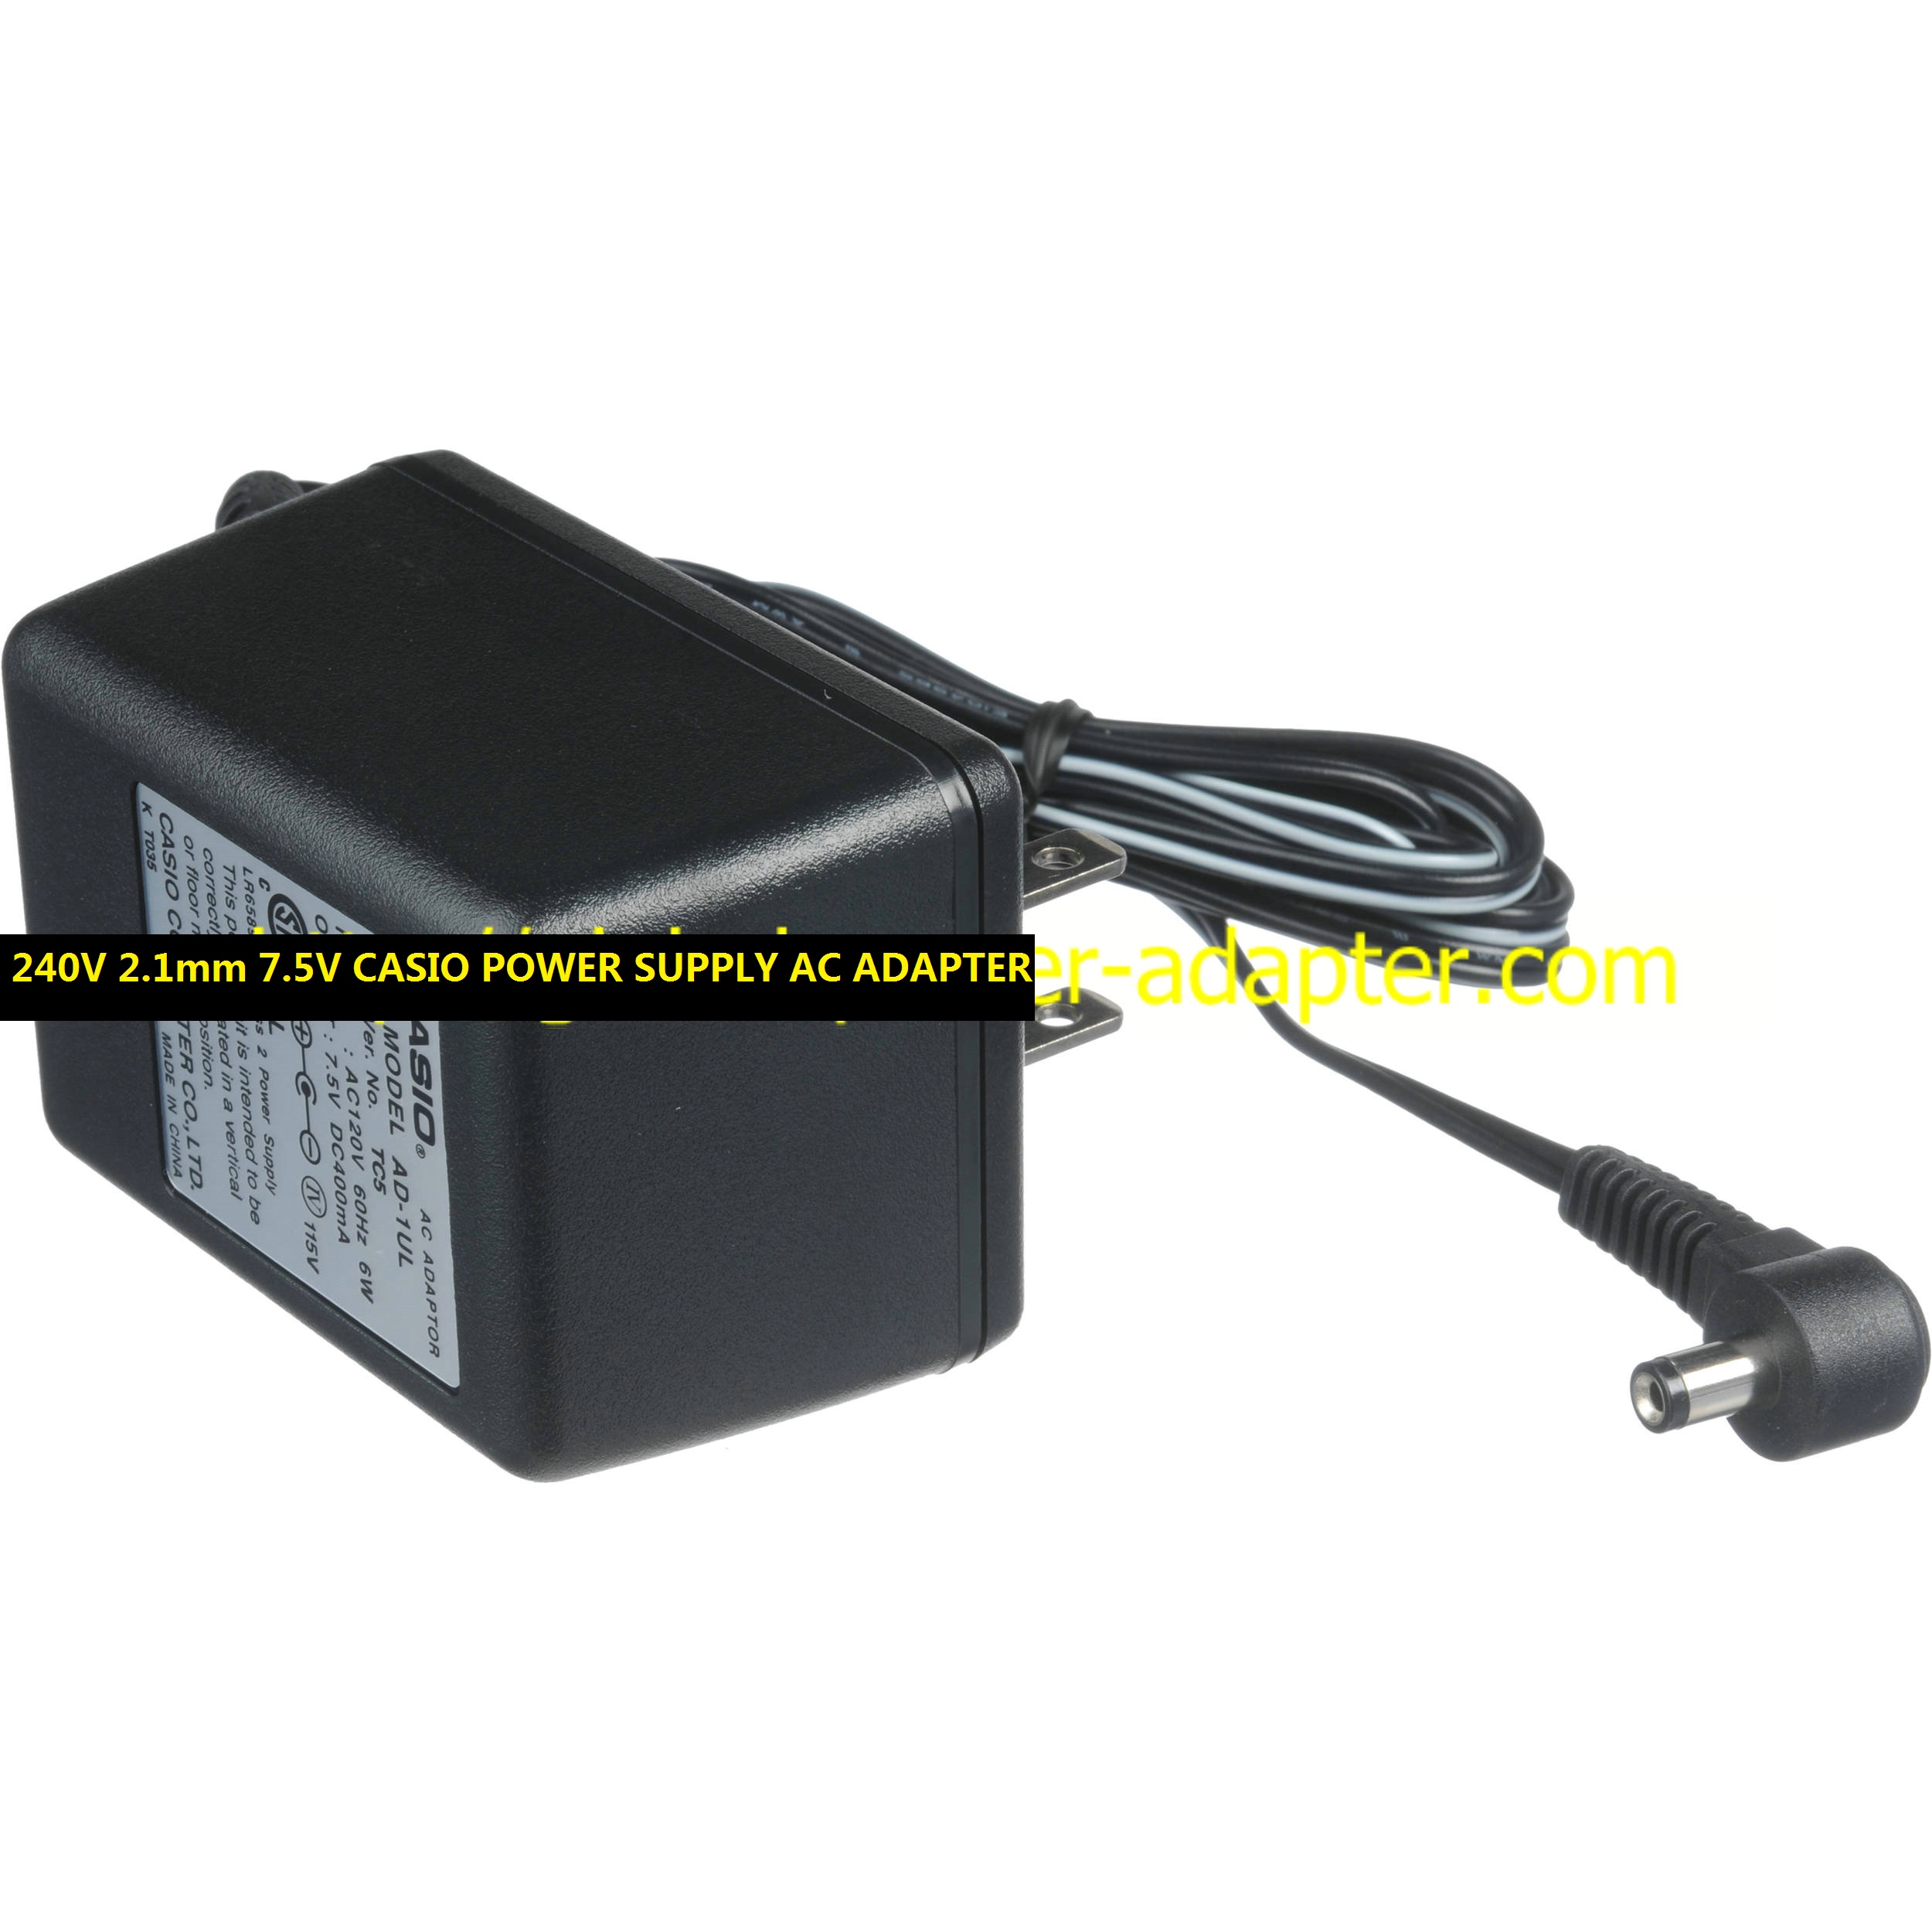 *100% Brand NEW* AC ADAPTER 240V 2.1mm 7.5V CASIO AD-1A POWER SUPPLY - Click Image to Close